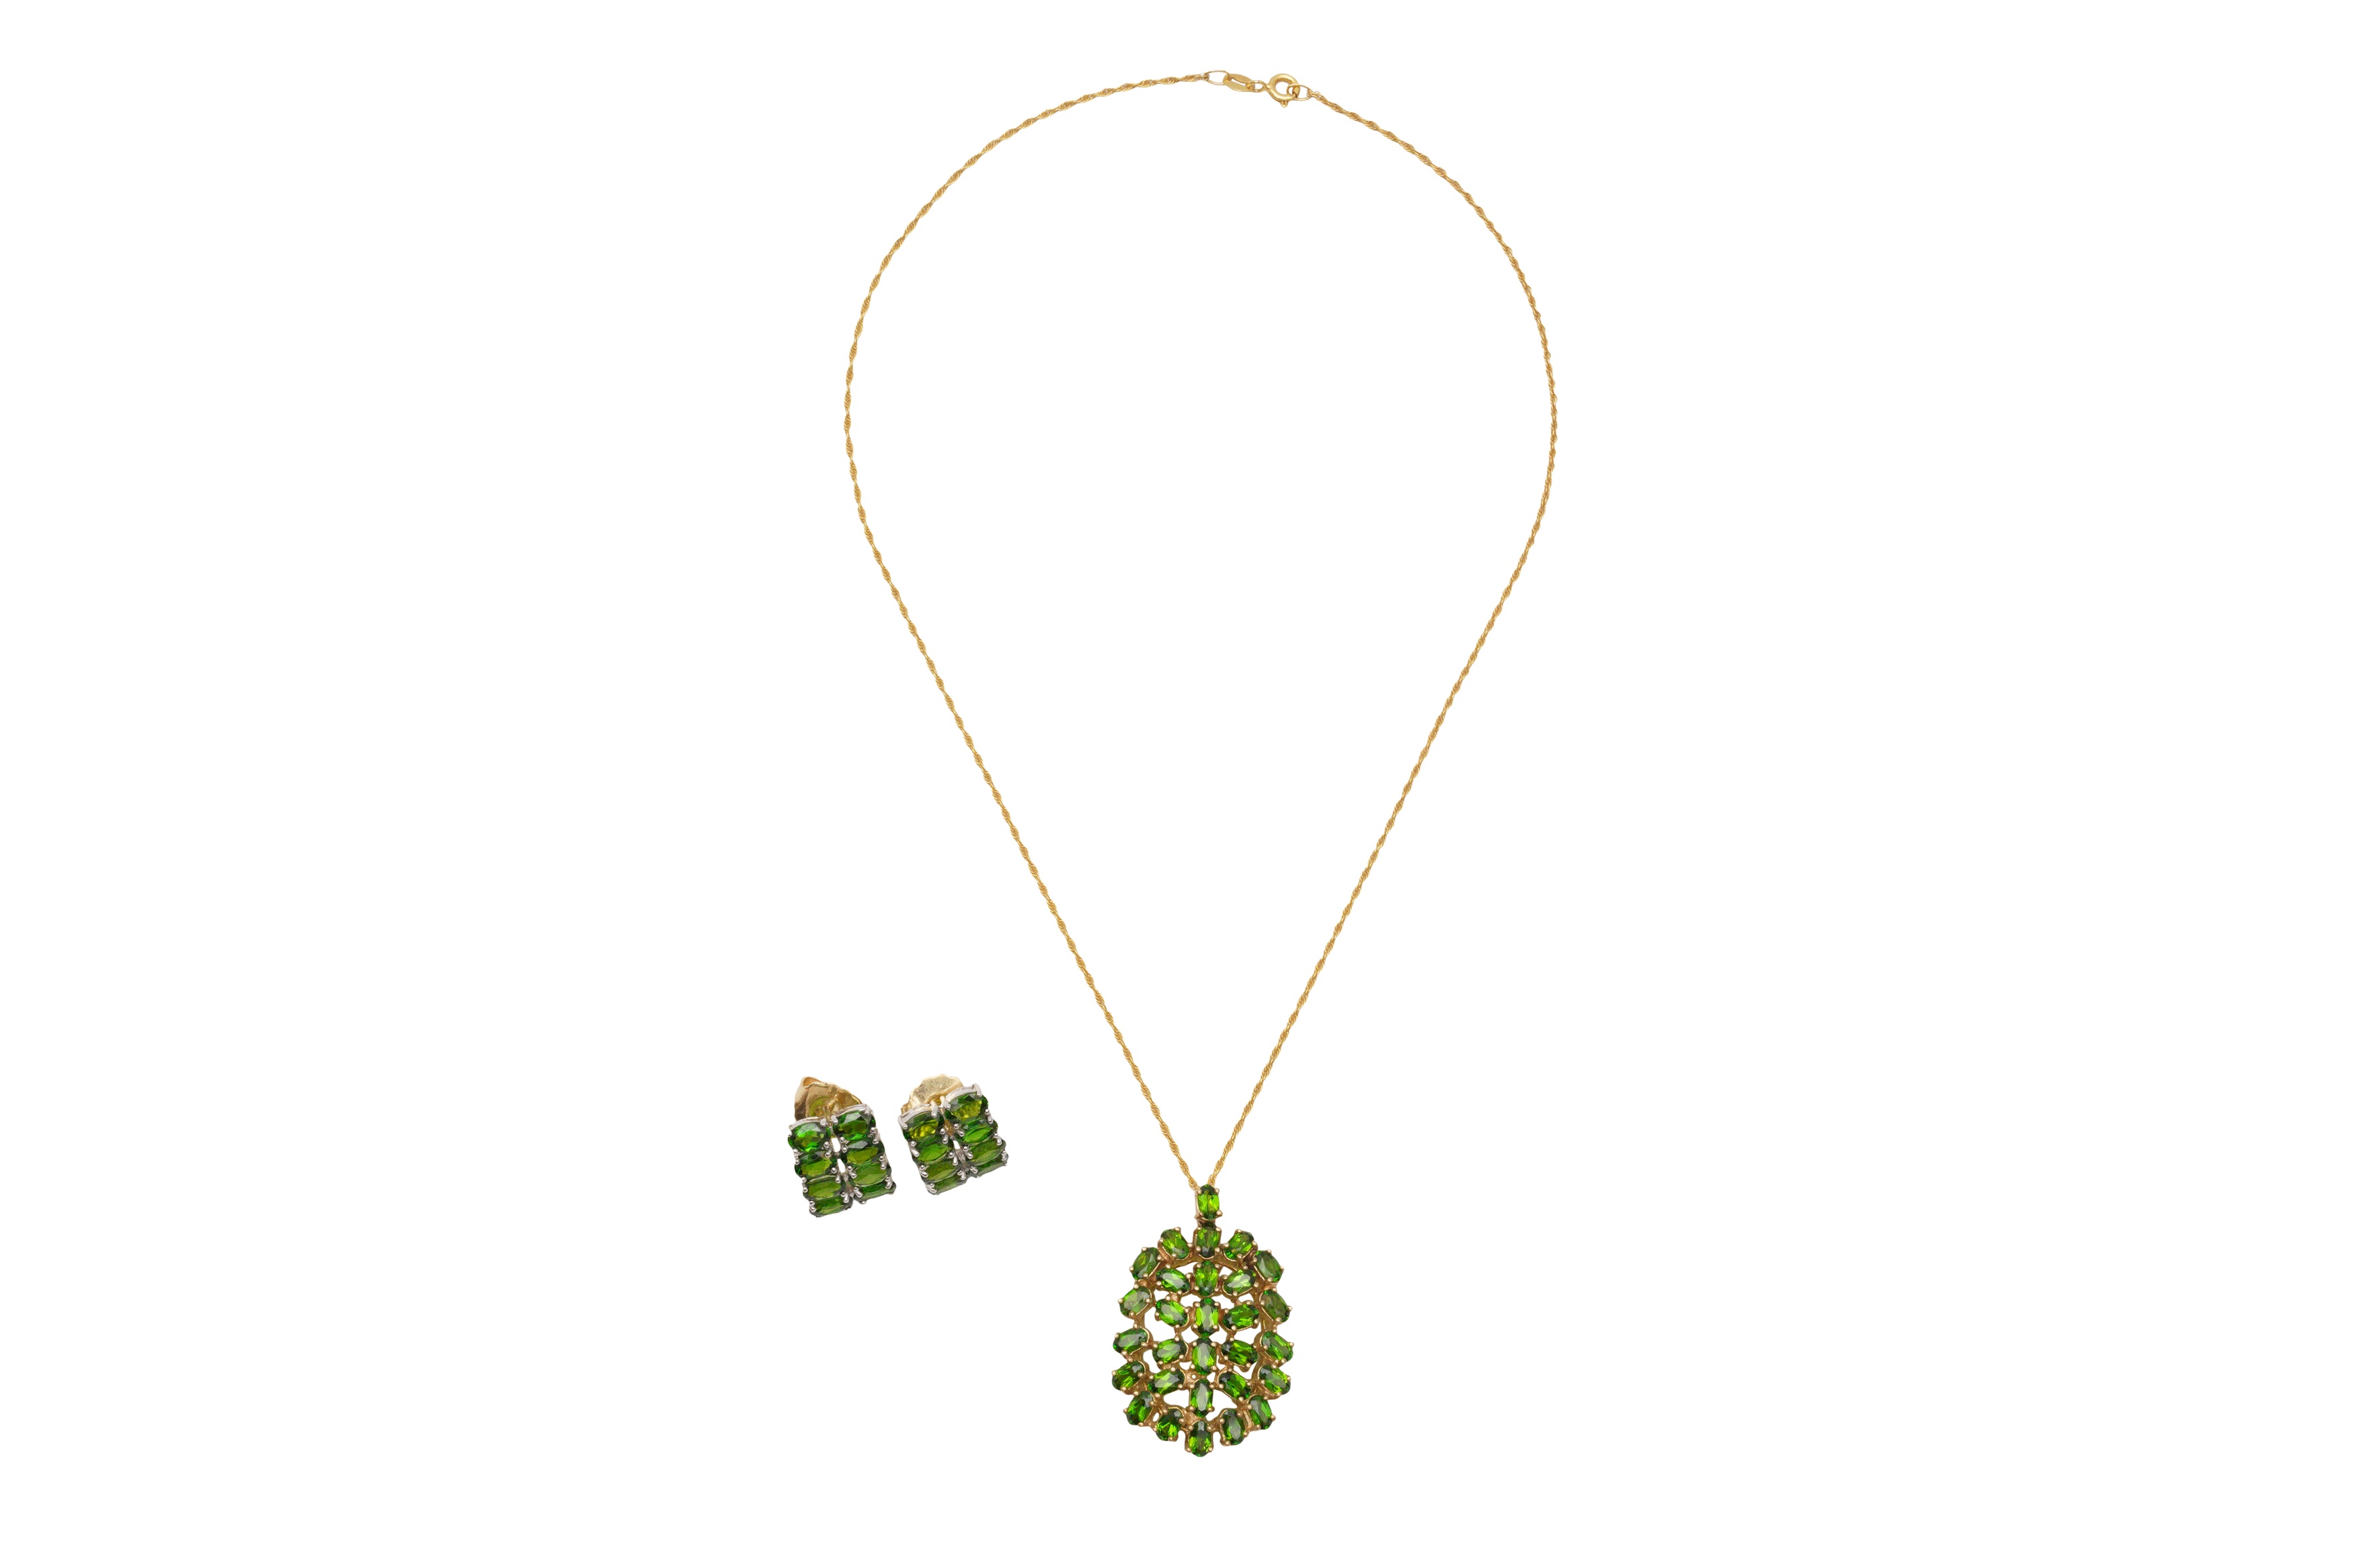 A 9CT GOLD DIOPSIDE PENDANT NECKLACE AND EARRINGS